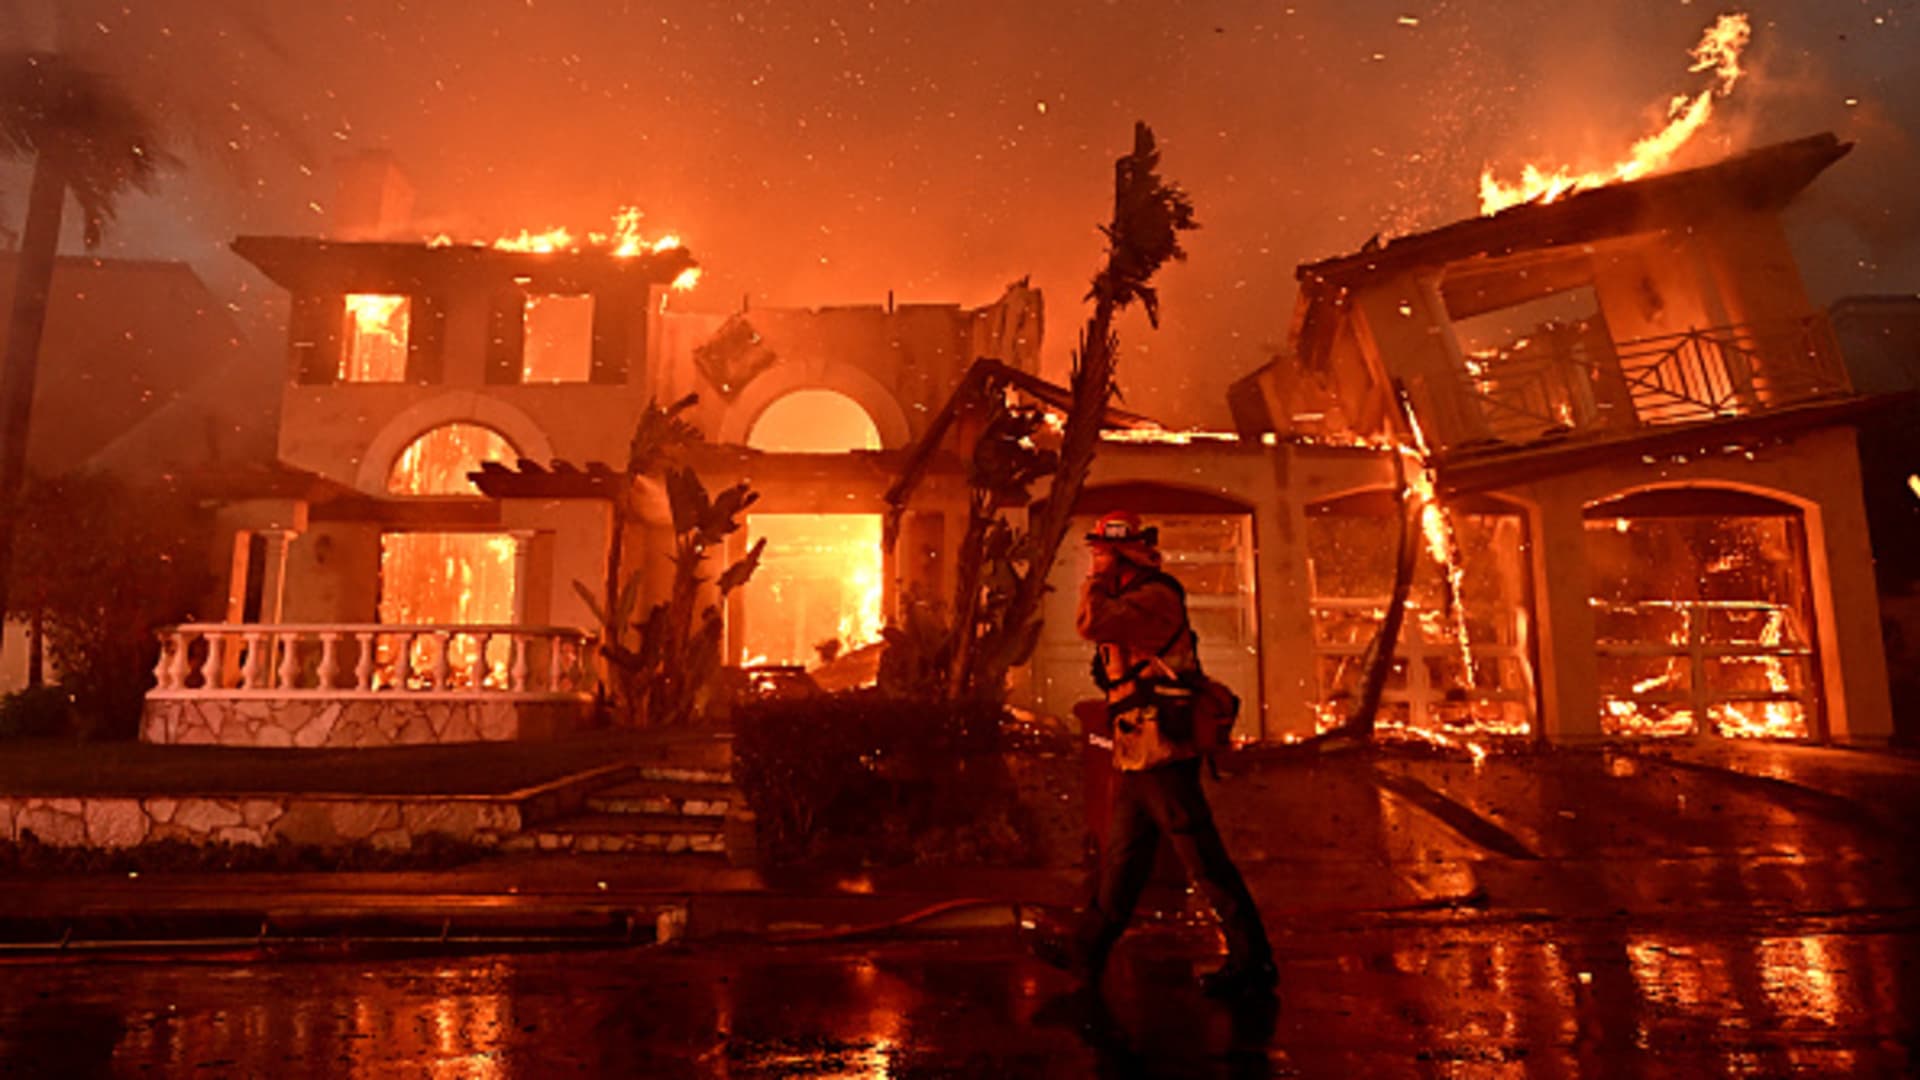 First Street Foundation scores wildfire risk for every home in America